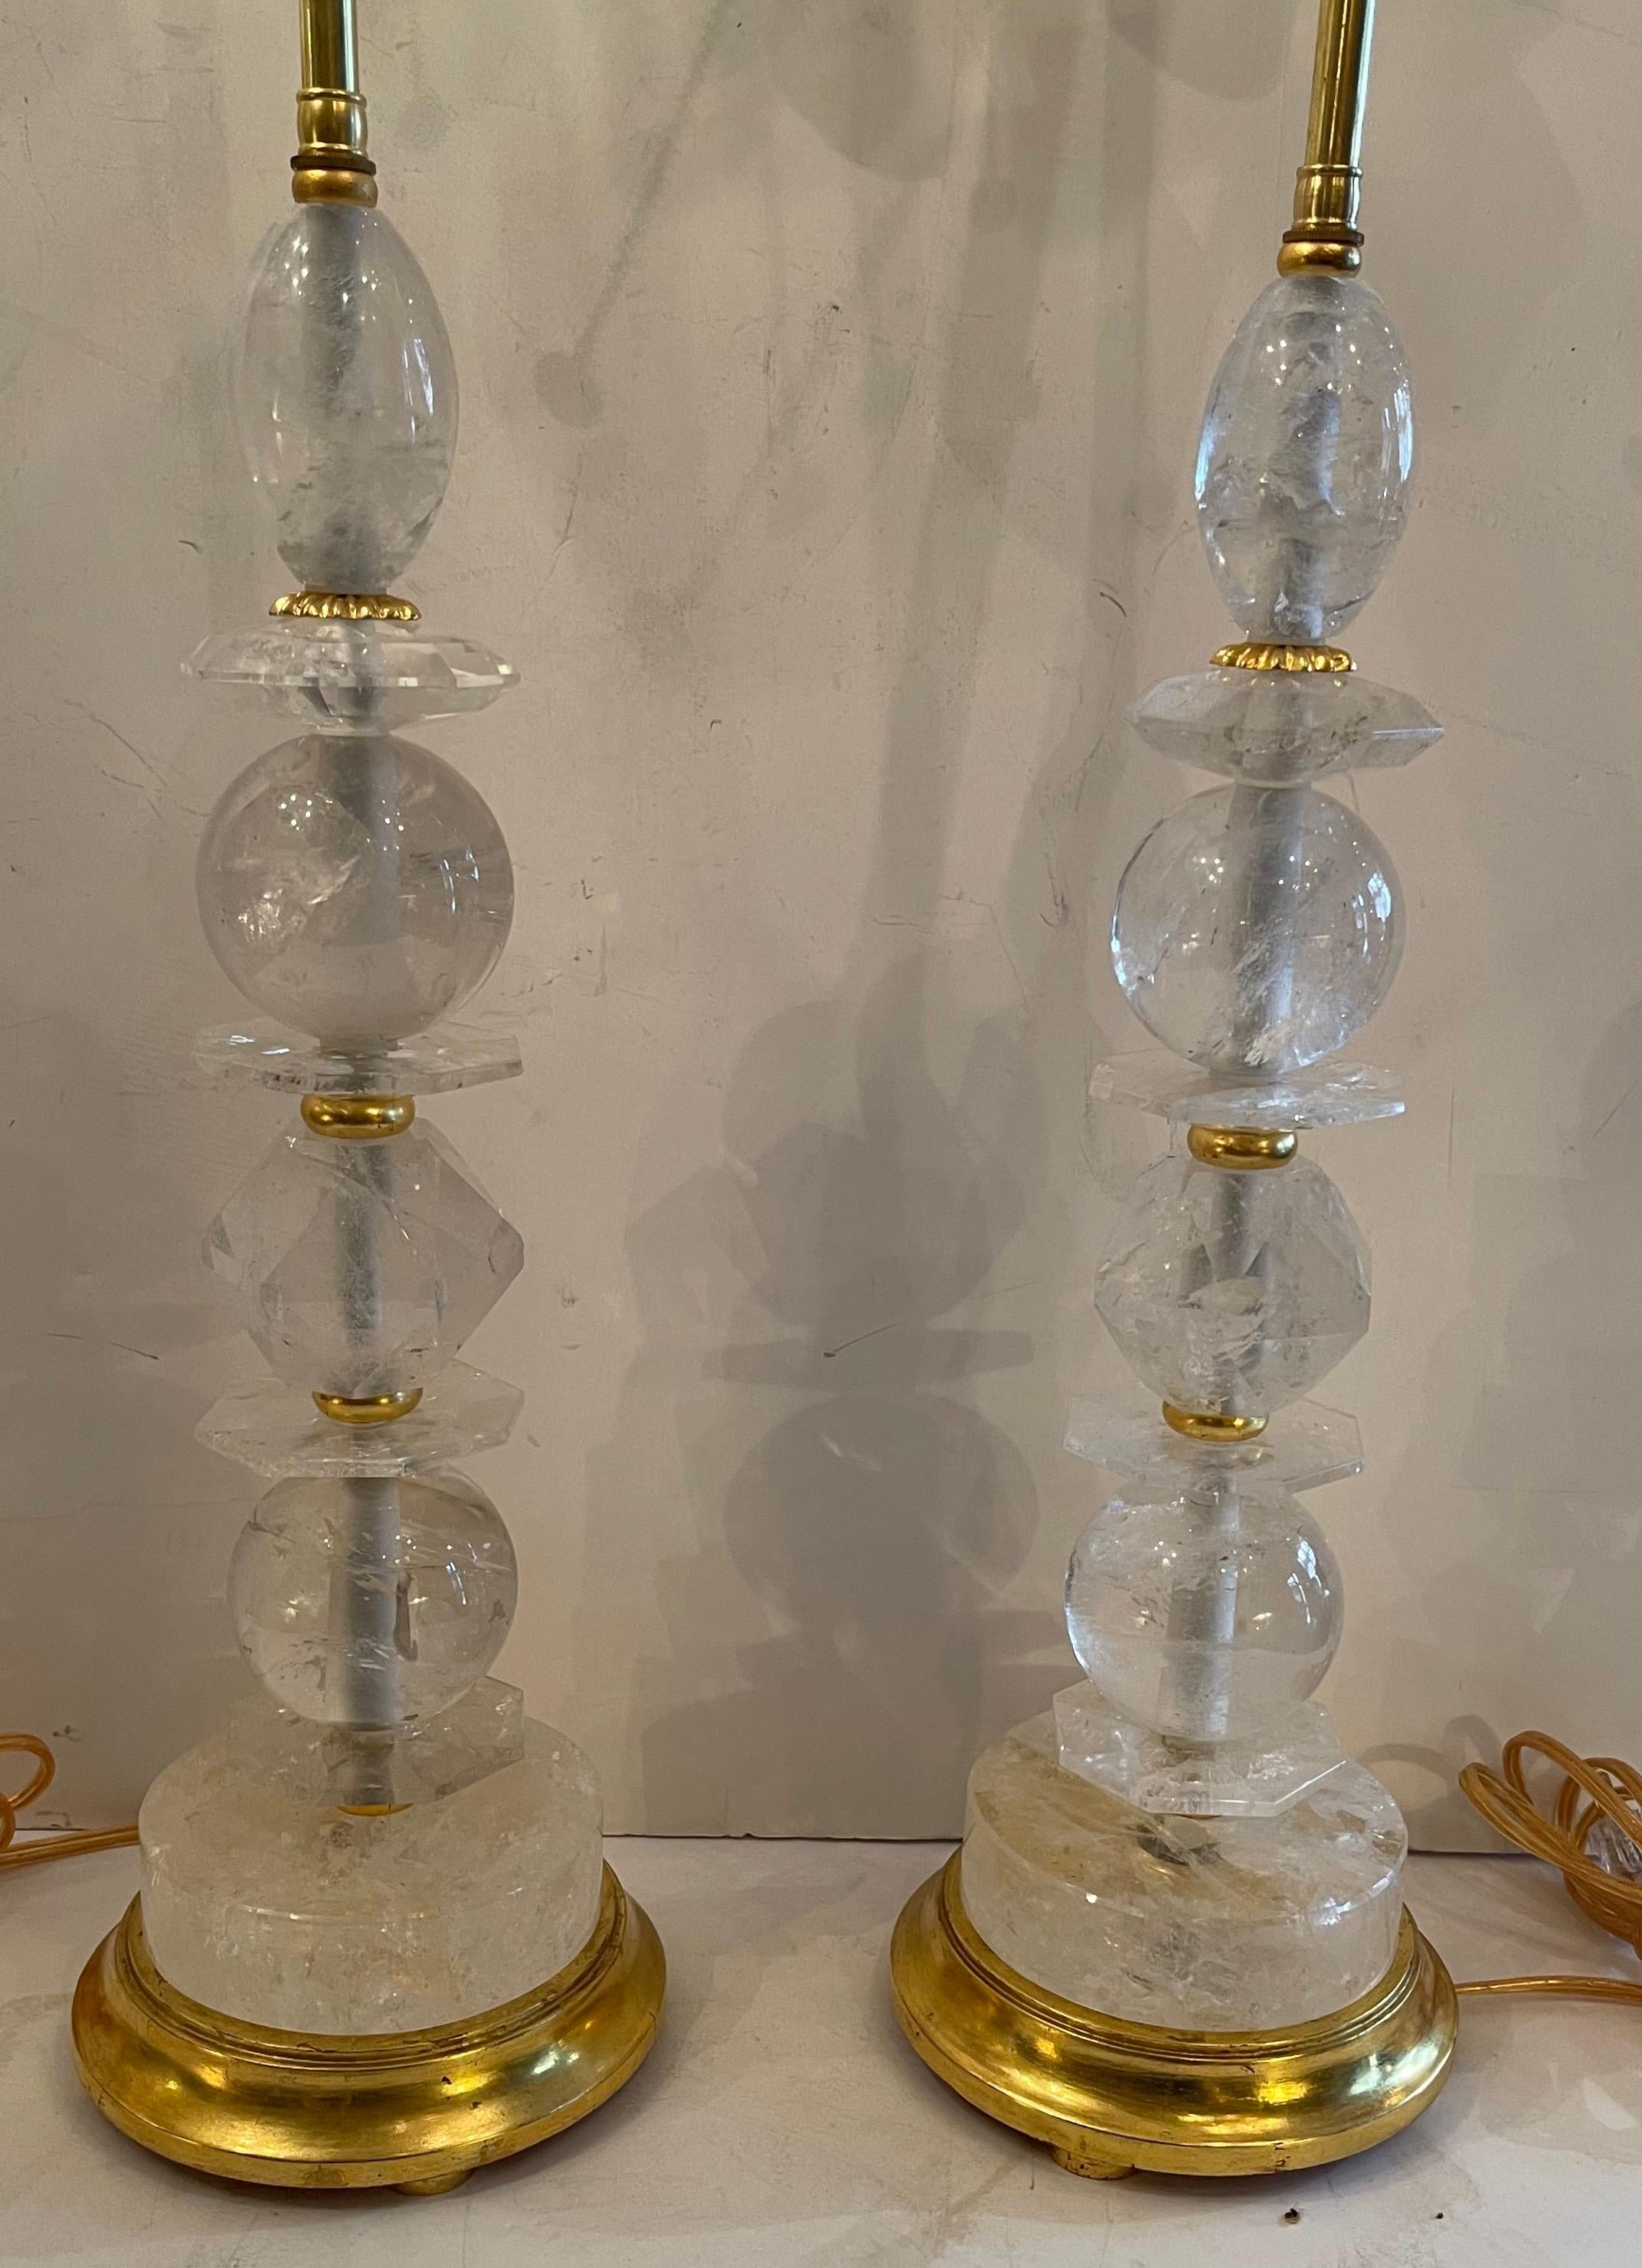 A Wonderful Pair of Mid-Century Modern Large various forms rock crystal stacking raised on gold leaf wood bases, rare fine table lamps in the manner of Maison Baguès.
Each with two new Edison sockets and rewired for US.